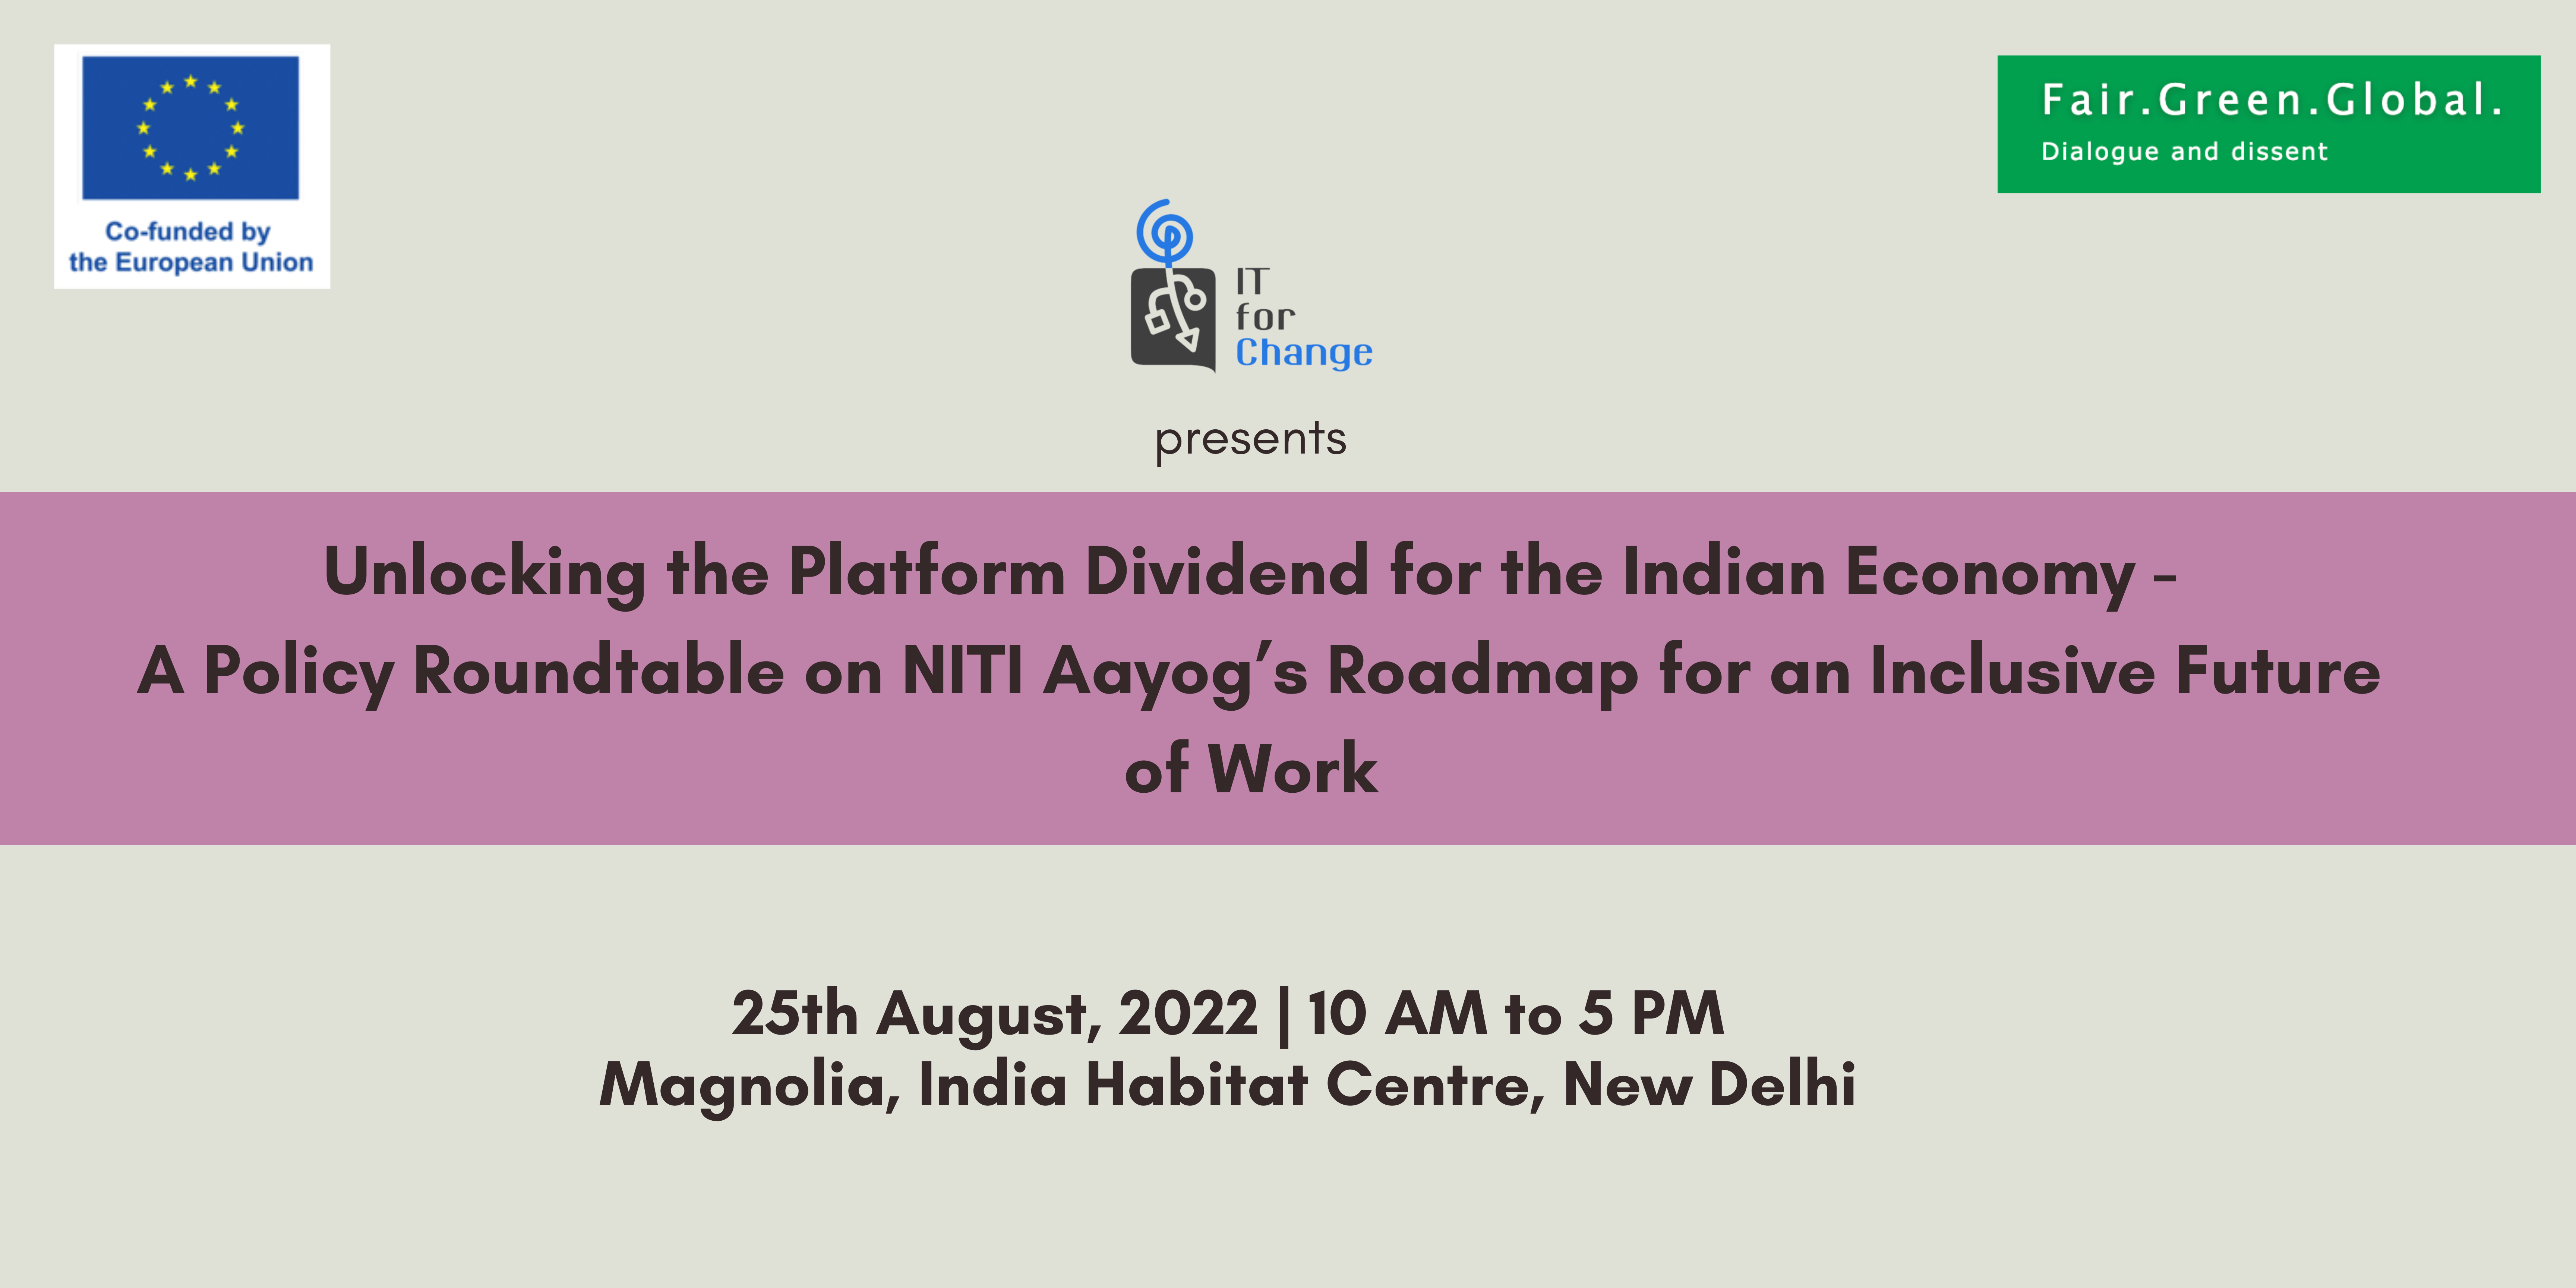 Unlocking the Platform Dividend for the Indian Economy -  A Policy Roundtable on NITI Aayog’s Roadmap for an Inclusive Future of Work